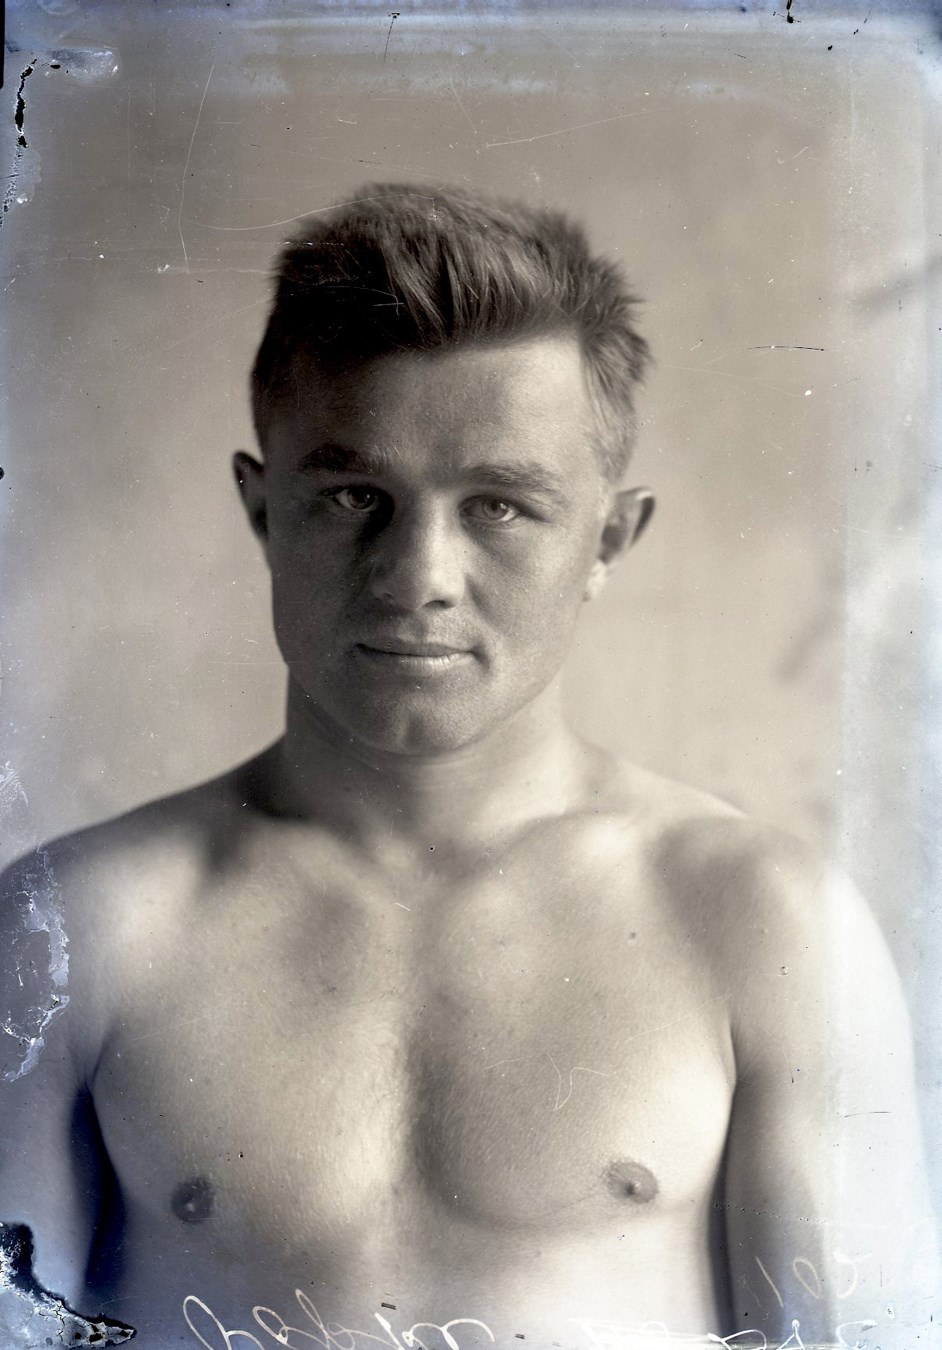 Dana Collection Of Important Boxing Negatives - Early 1900s Boxer Billy Parke Type I Glass Plate Negative by Dana Studio